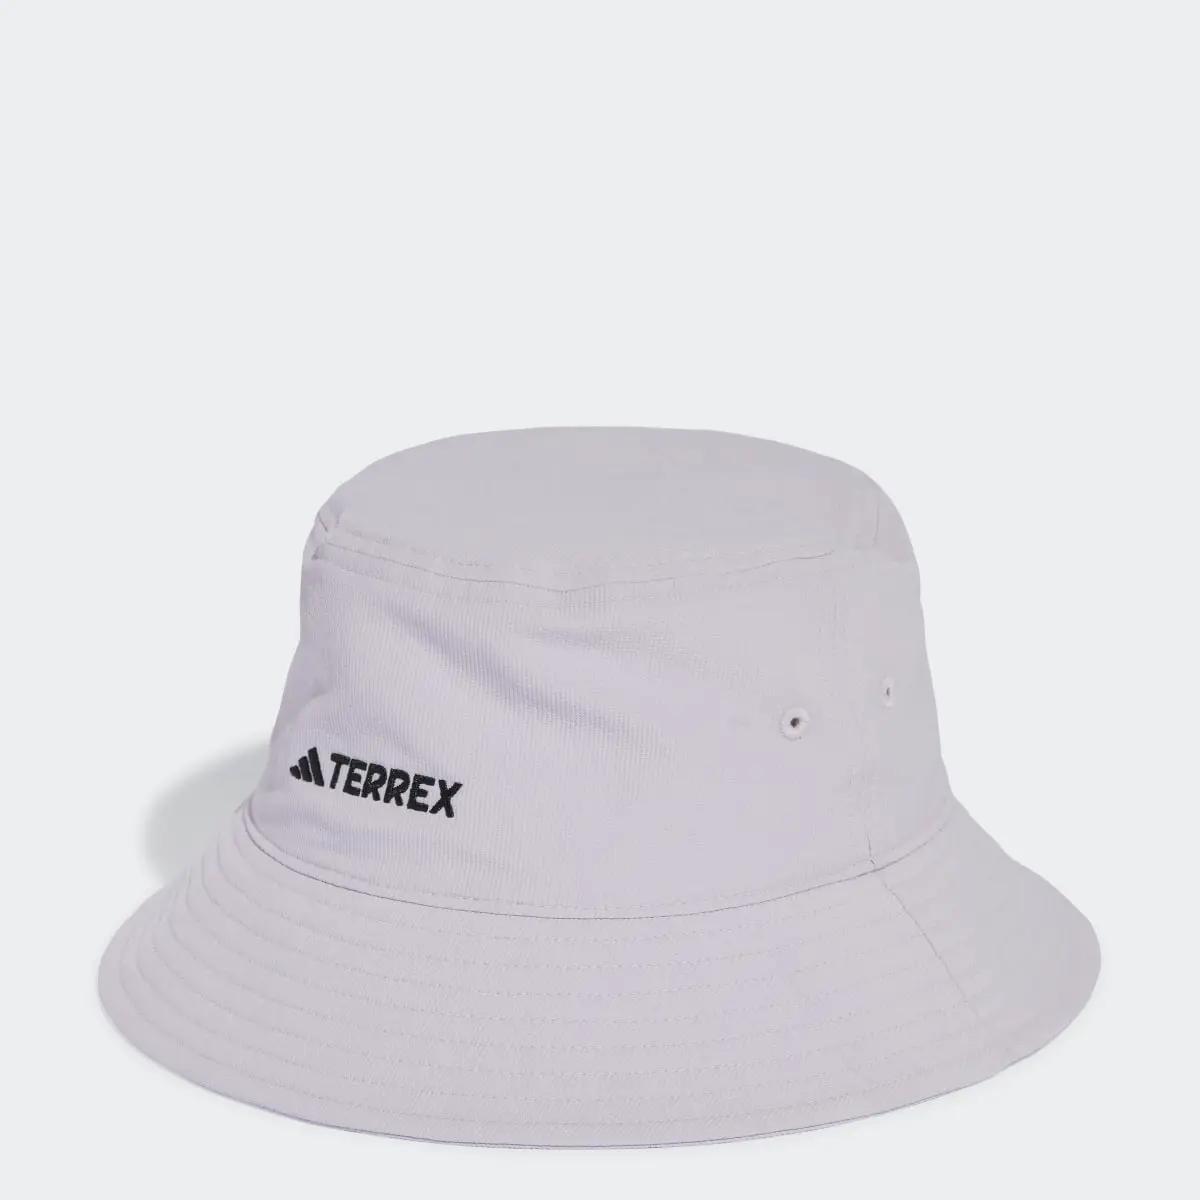 Adidas Terrex HEAT.RDY Made To Be Remade Bucket Hat. 1